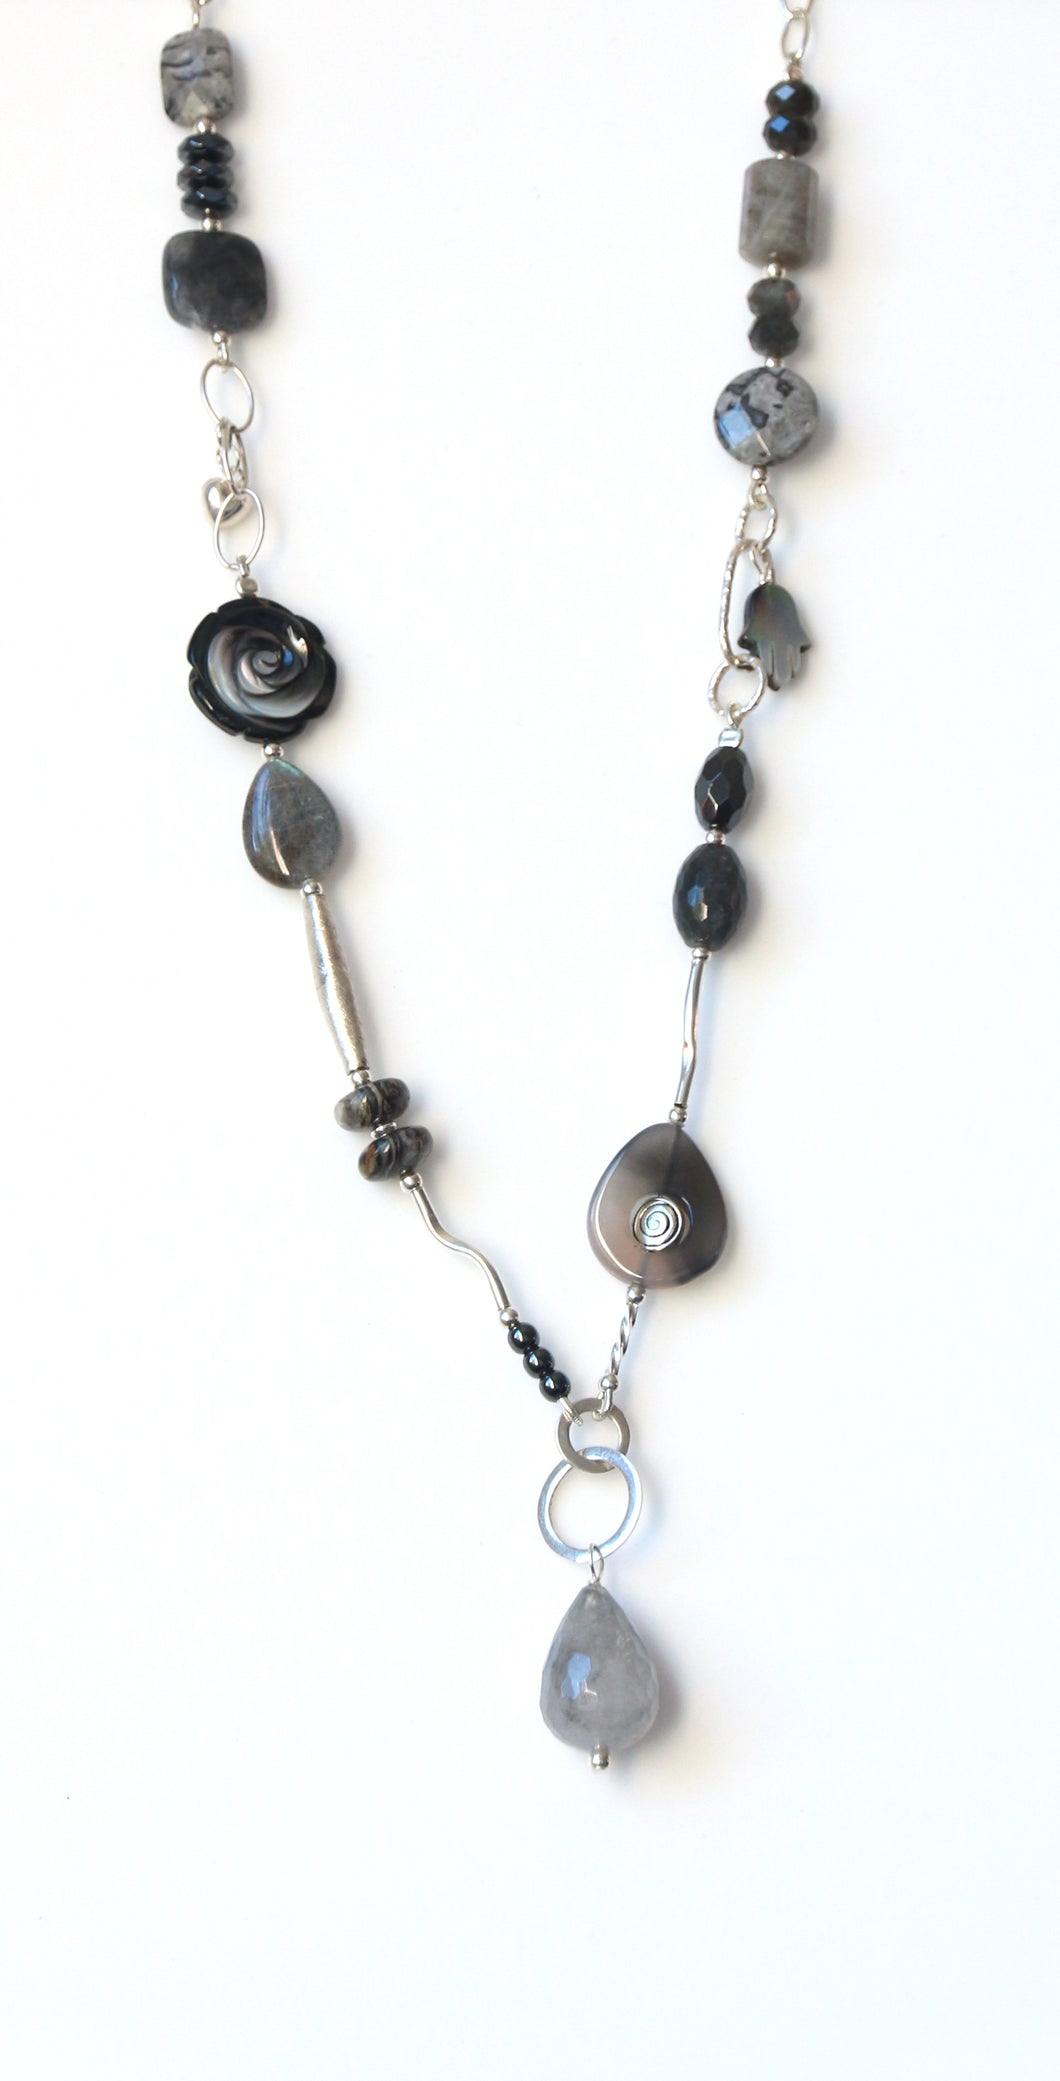 Australian Handmade Grey Necklace with Labradorite Agate Grey Quartz Mother of Pearl and Sterling Silver